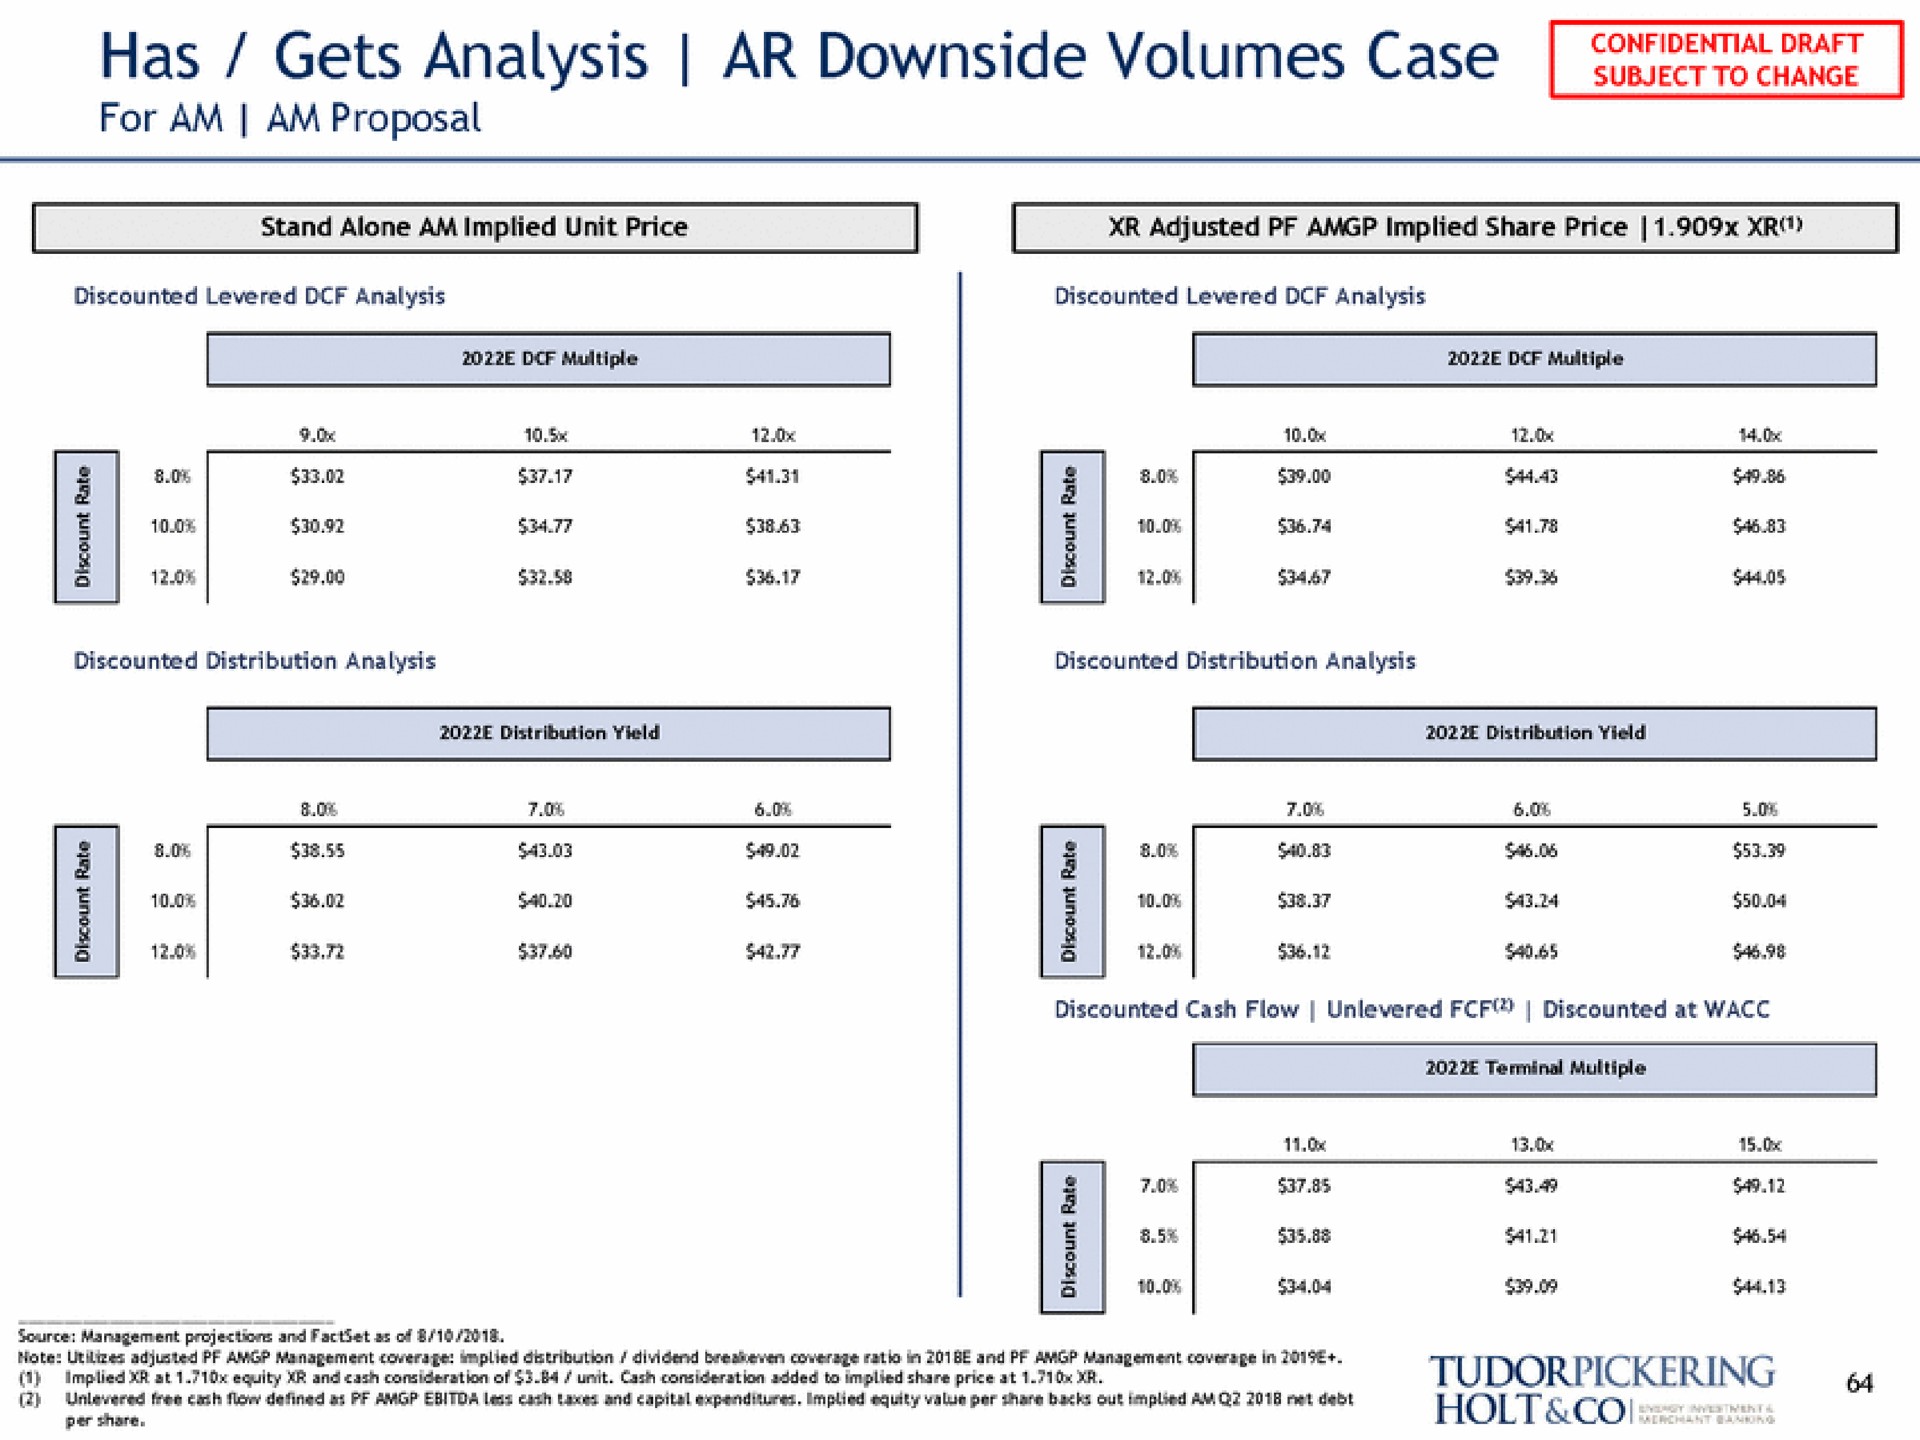 has gets analysis downside volumes case subject to change | Tudor, Pickering, Holt & Co